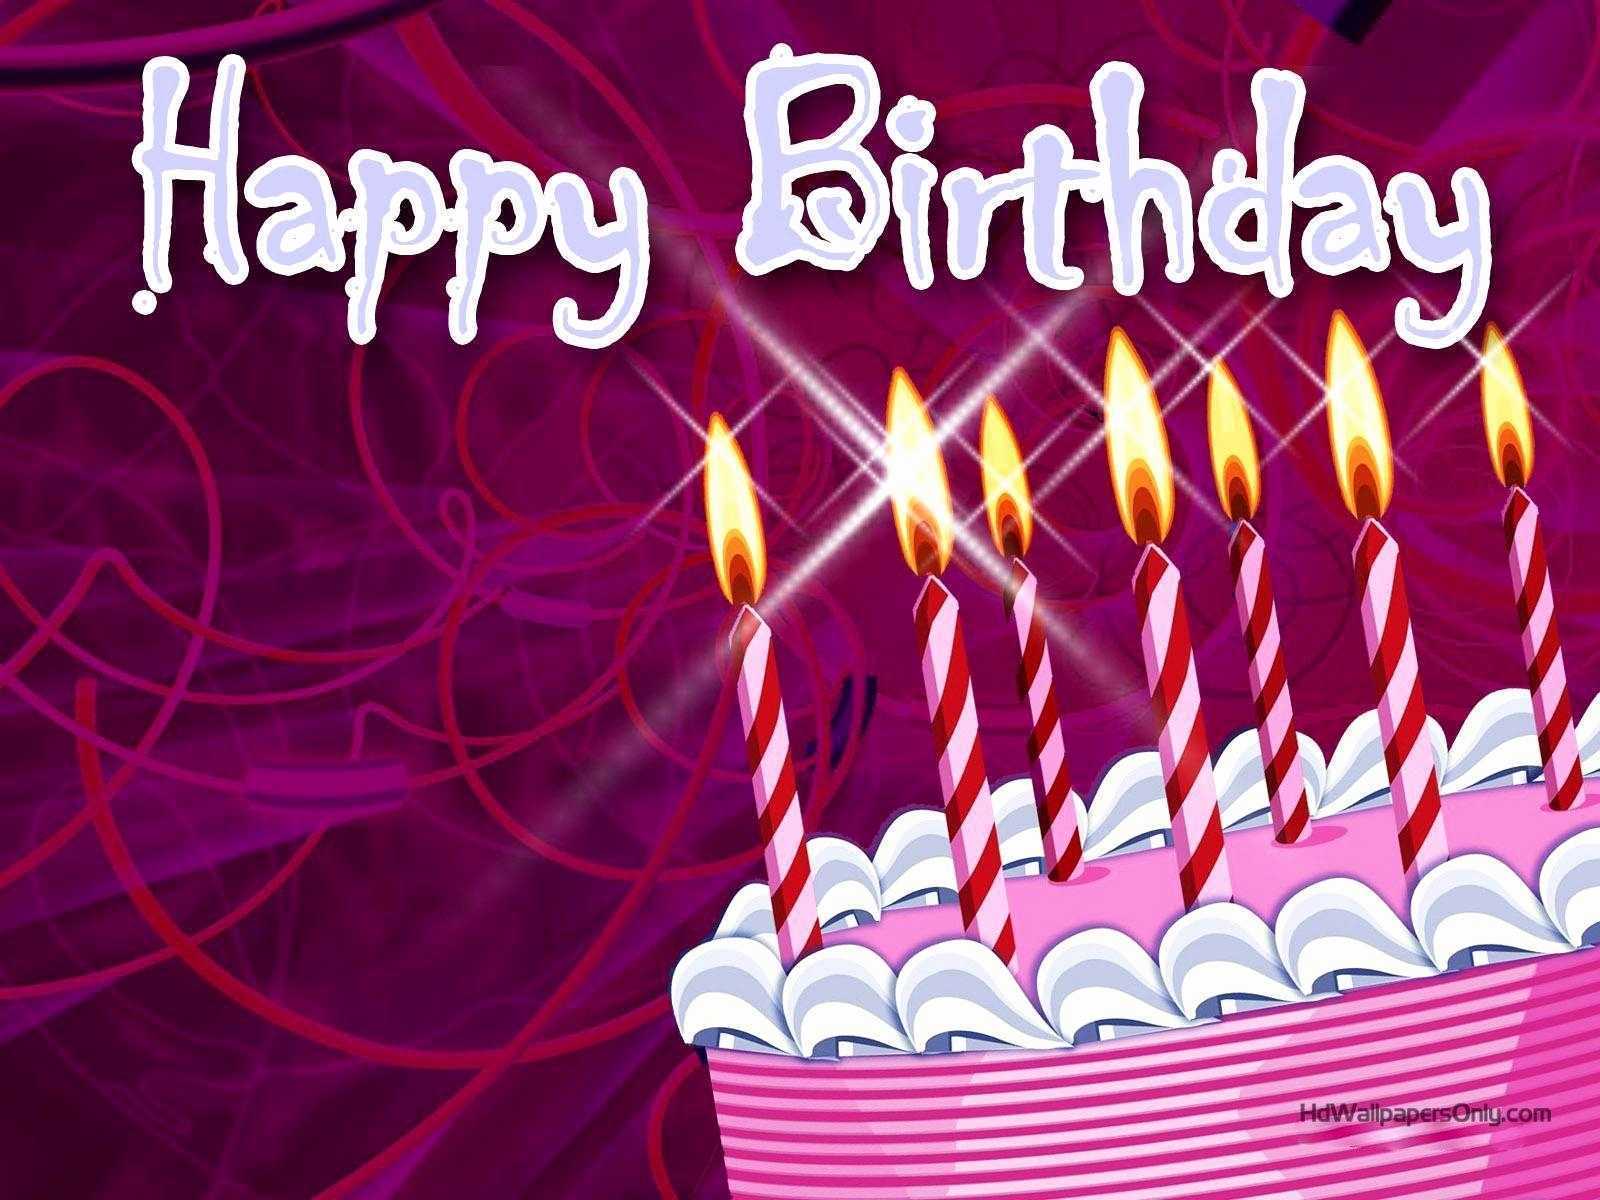 Download 11 Awesome Happy Birthday Image High Resolution Image